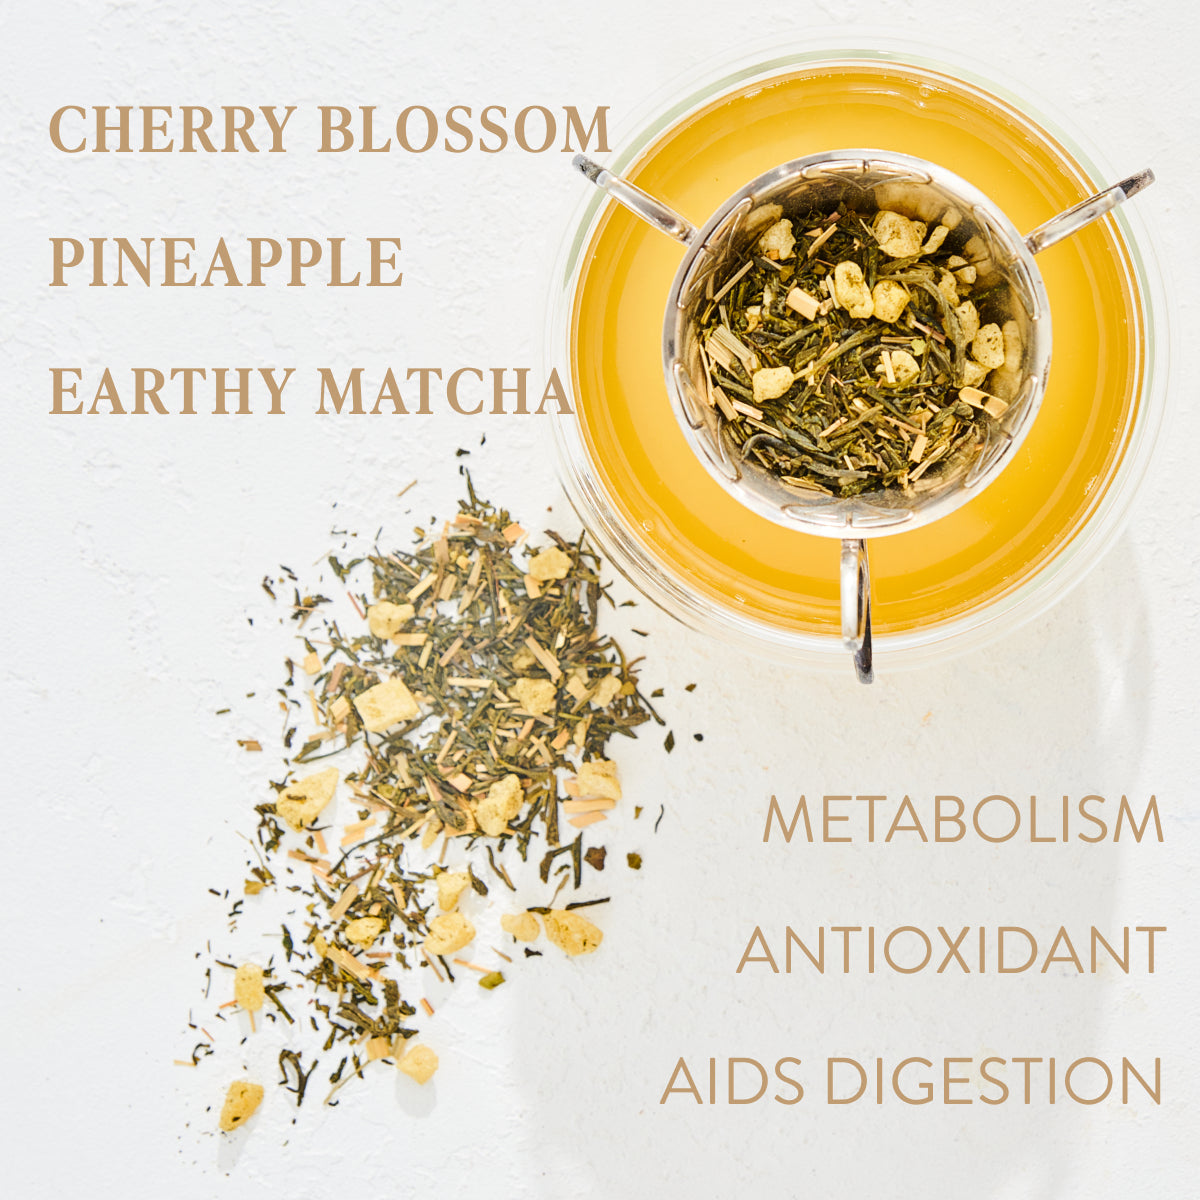 A cup of yellow tea viewed from above, with green tea leaves and pineapple pieces inside. Loose leaf tea and pineapple pieces are scattered on the table. Text on the image reads "Emerald - Cherry Blossom Pineapple Cream Green Tea, Earthy Matcha, Metabolism, Antioxidant, Aids Digestion." Experience the charm of Magic Hour.